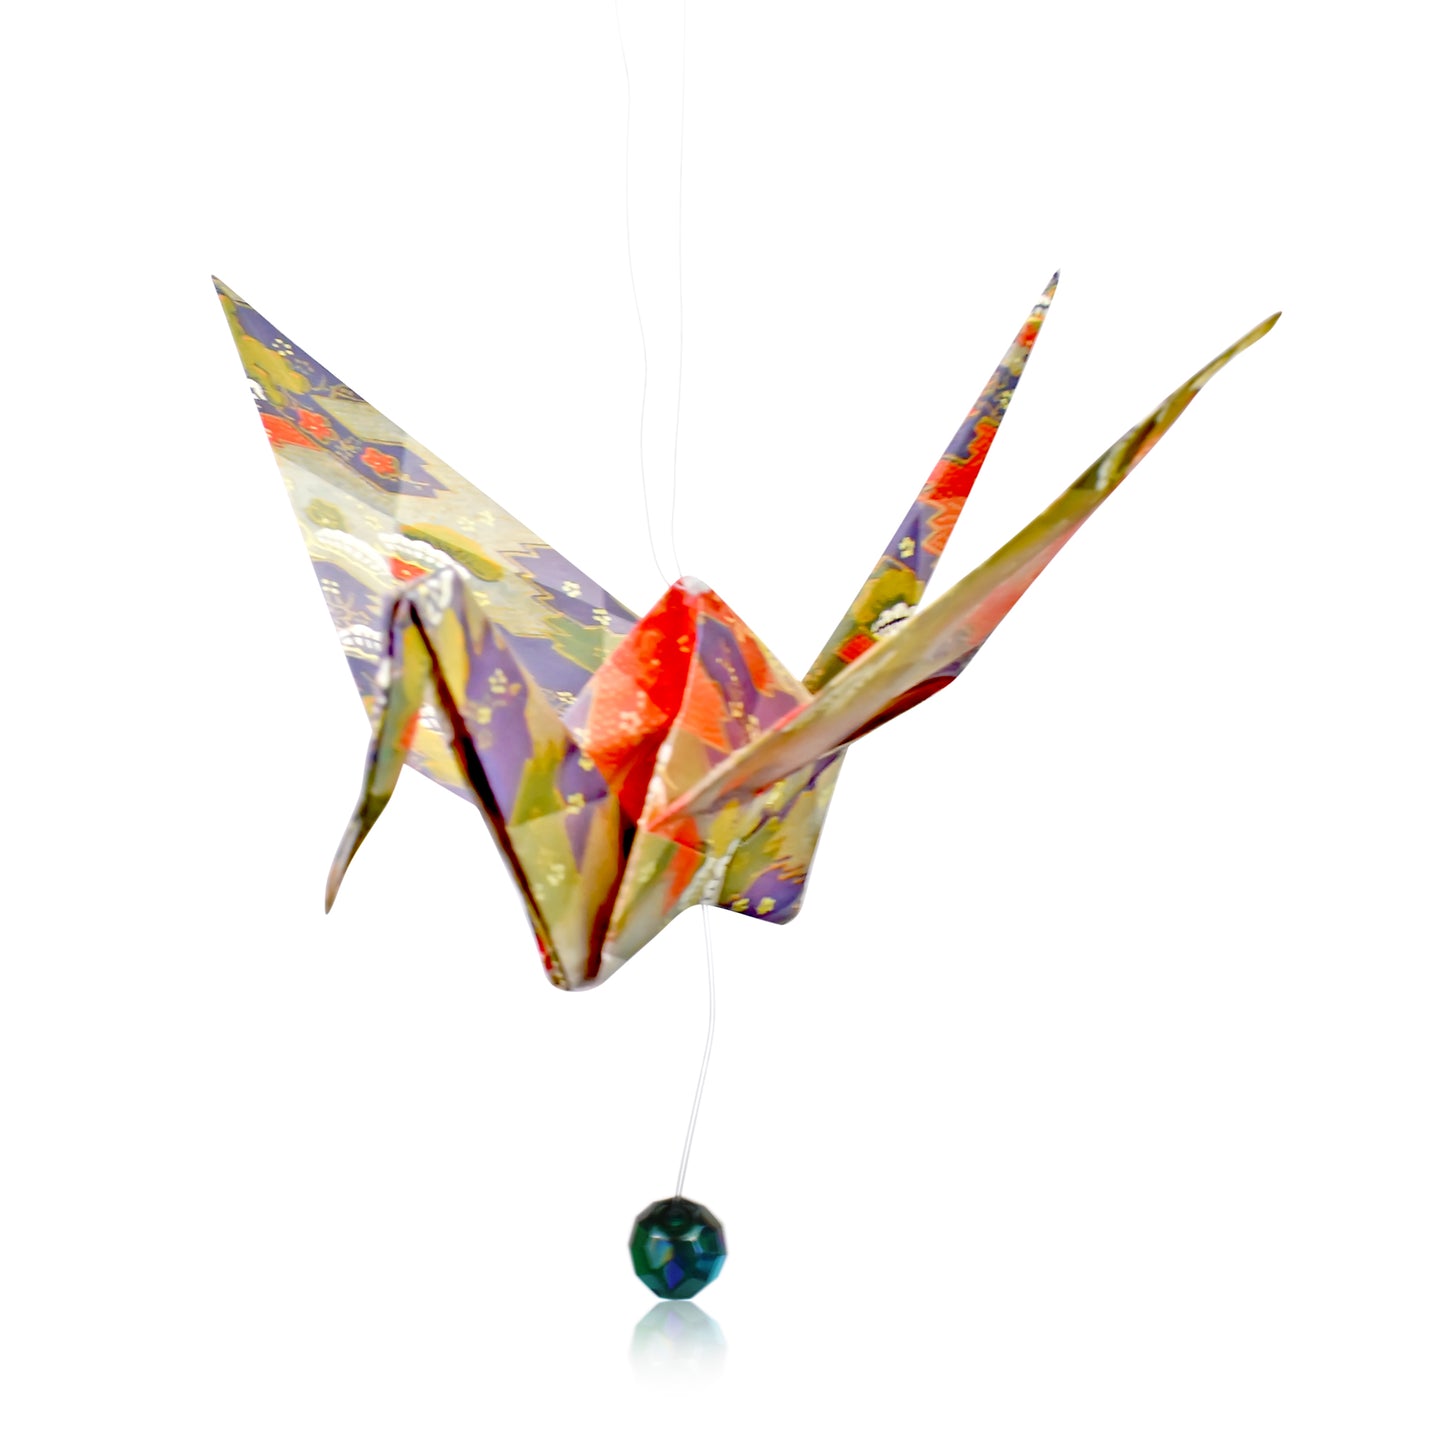 Give the Perfect Birthday Gift with Origami Cranes: December Birthstone